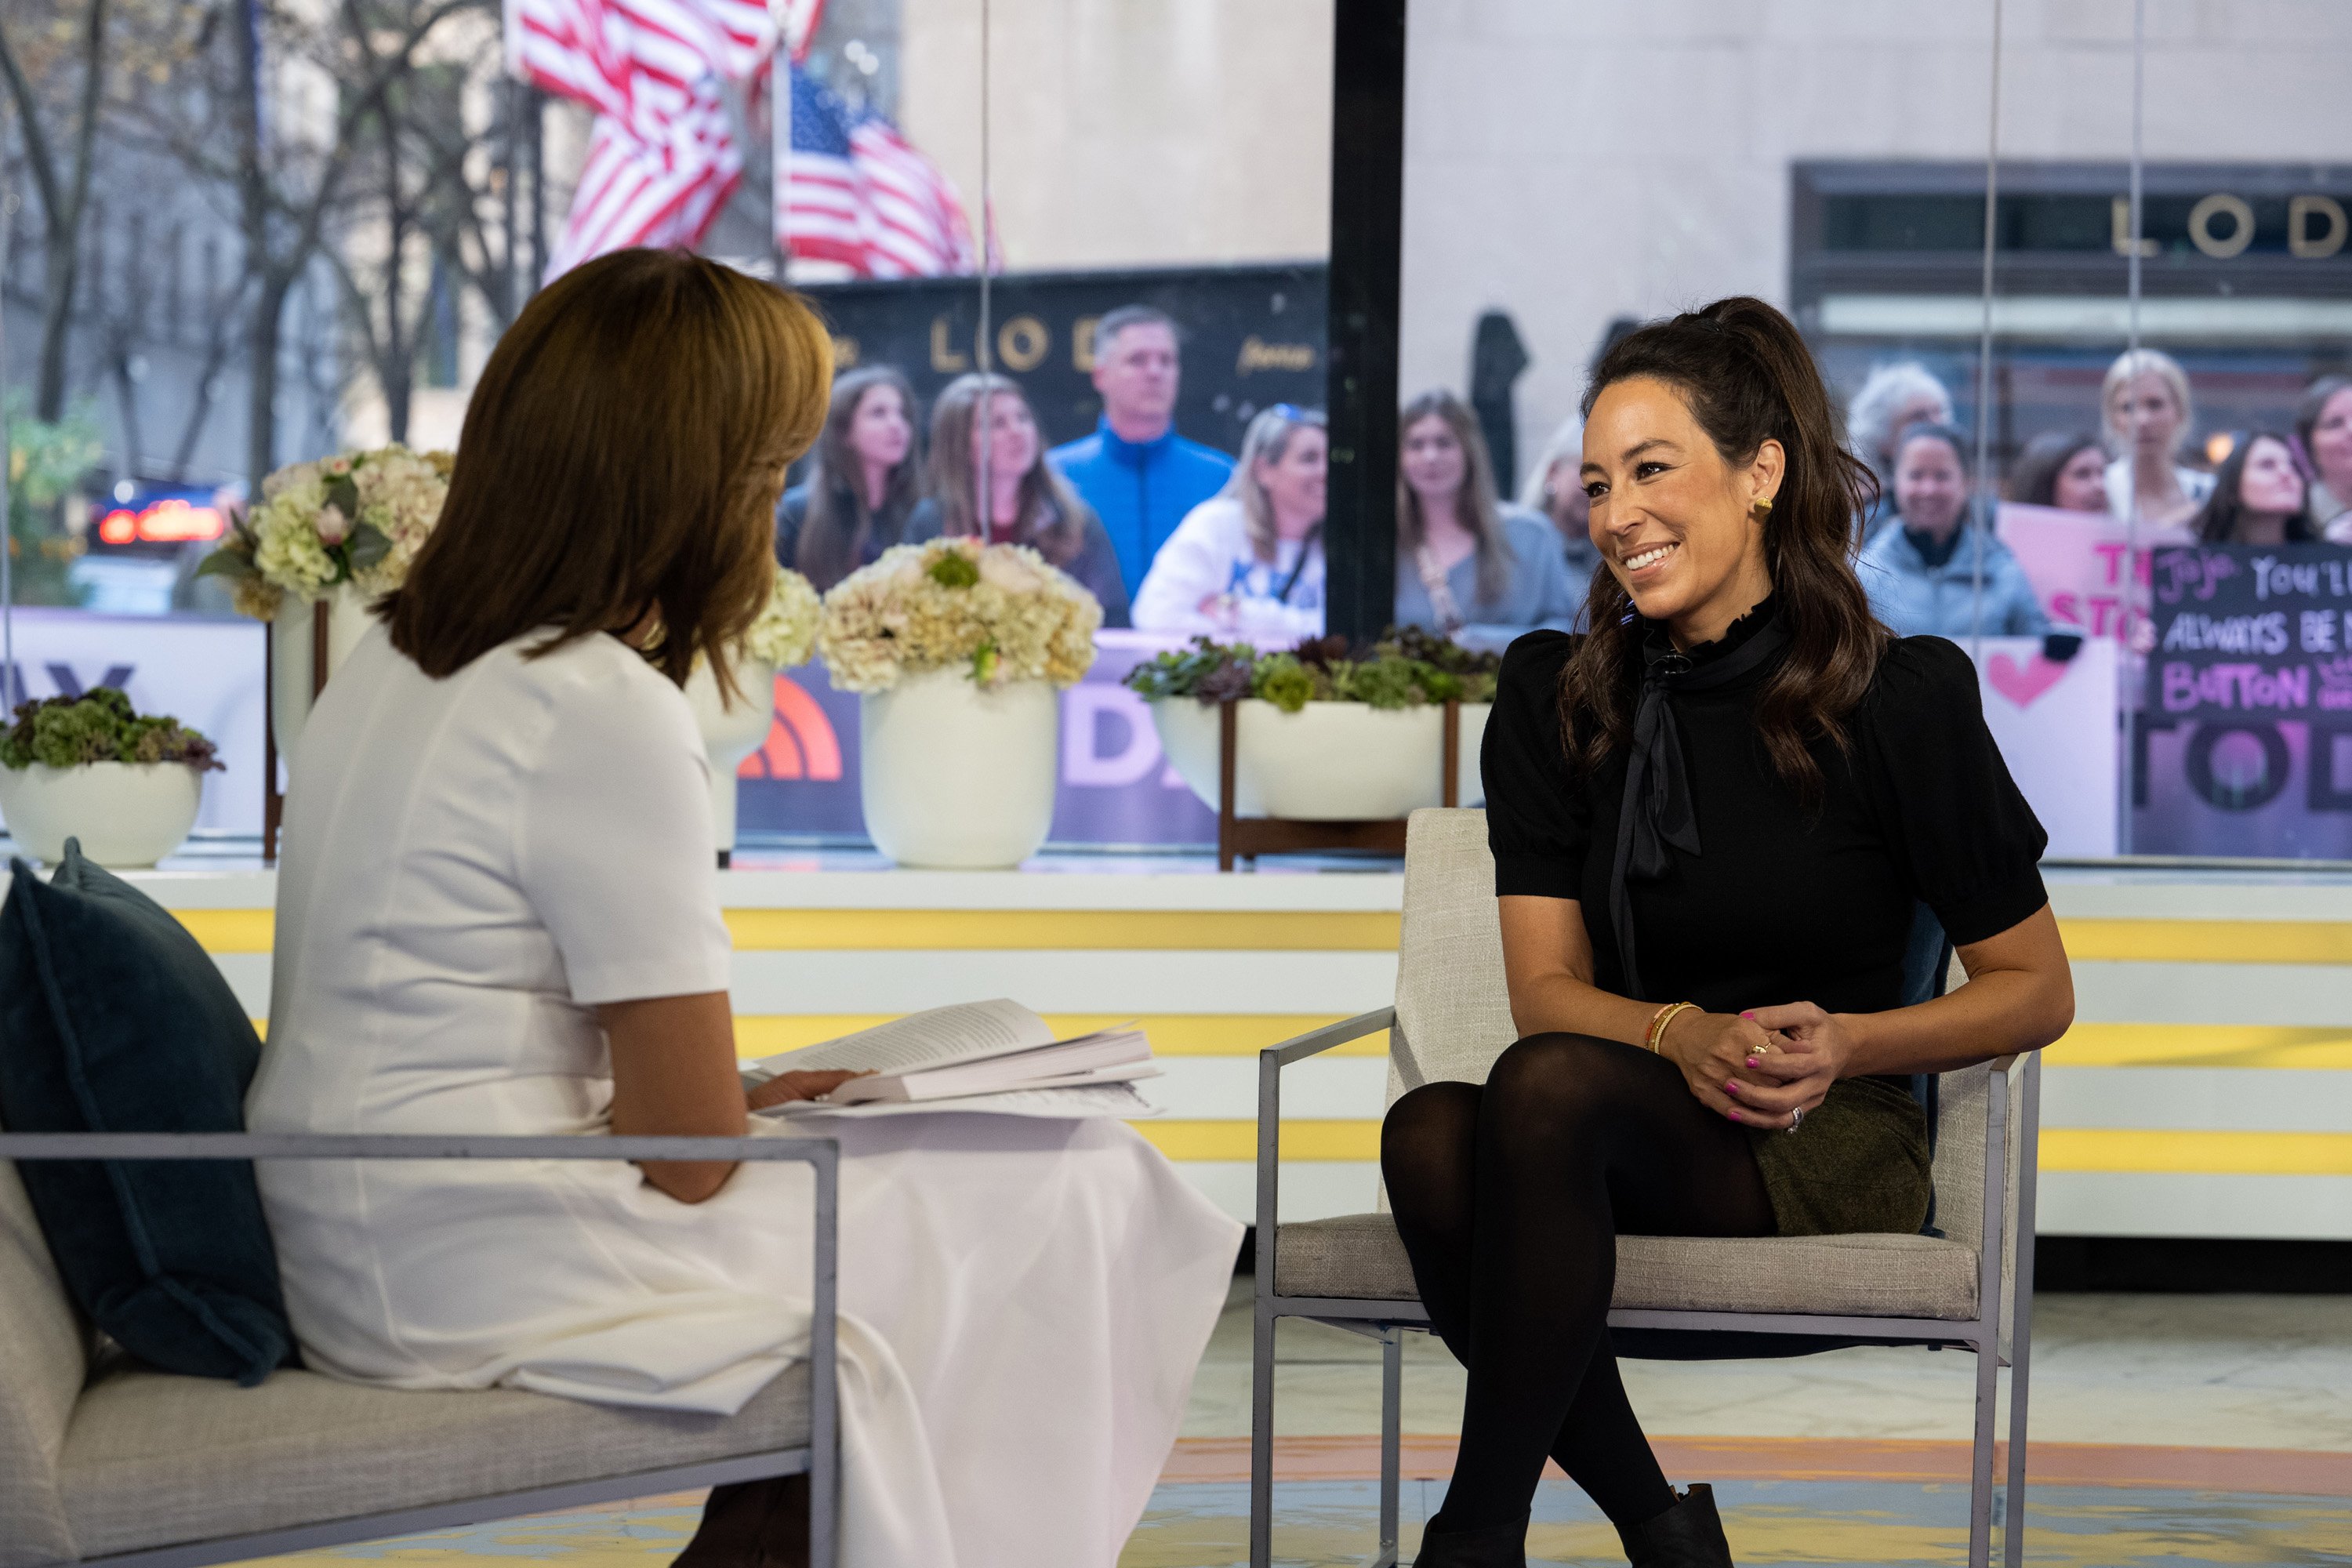 entertainment--news.com - Joanna Gaines Reveals What She'd Be Doing If It Weren't for Her Interior Design Career